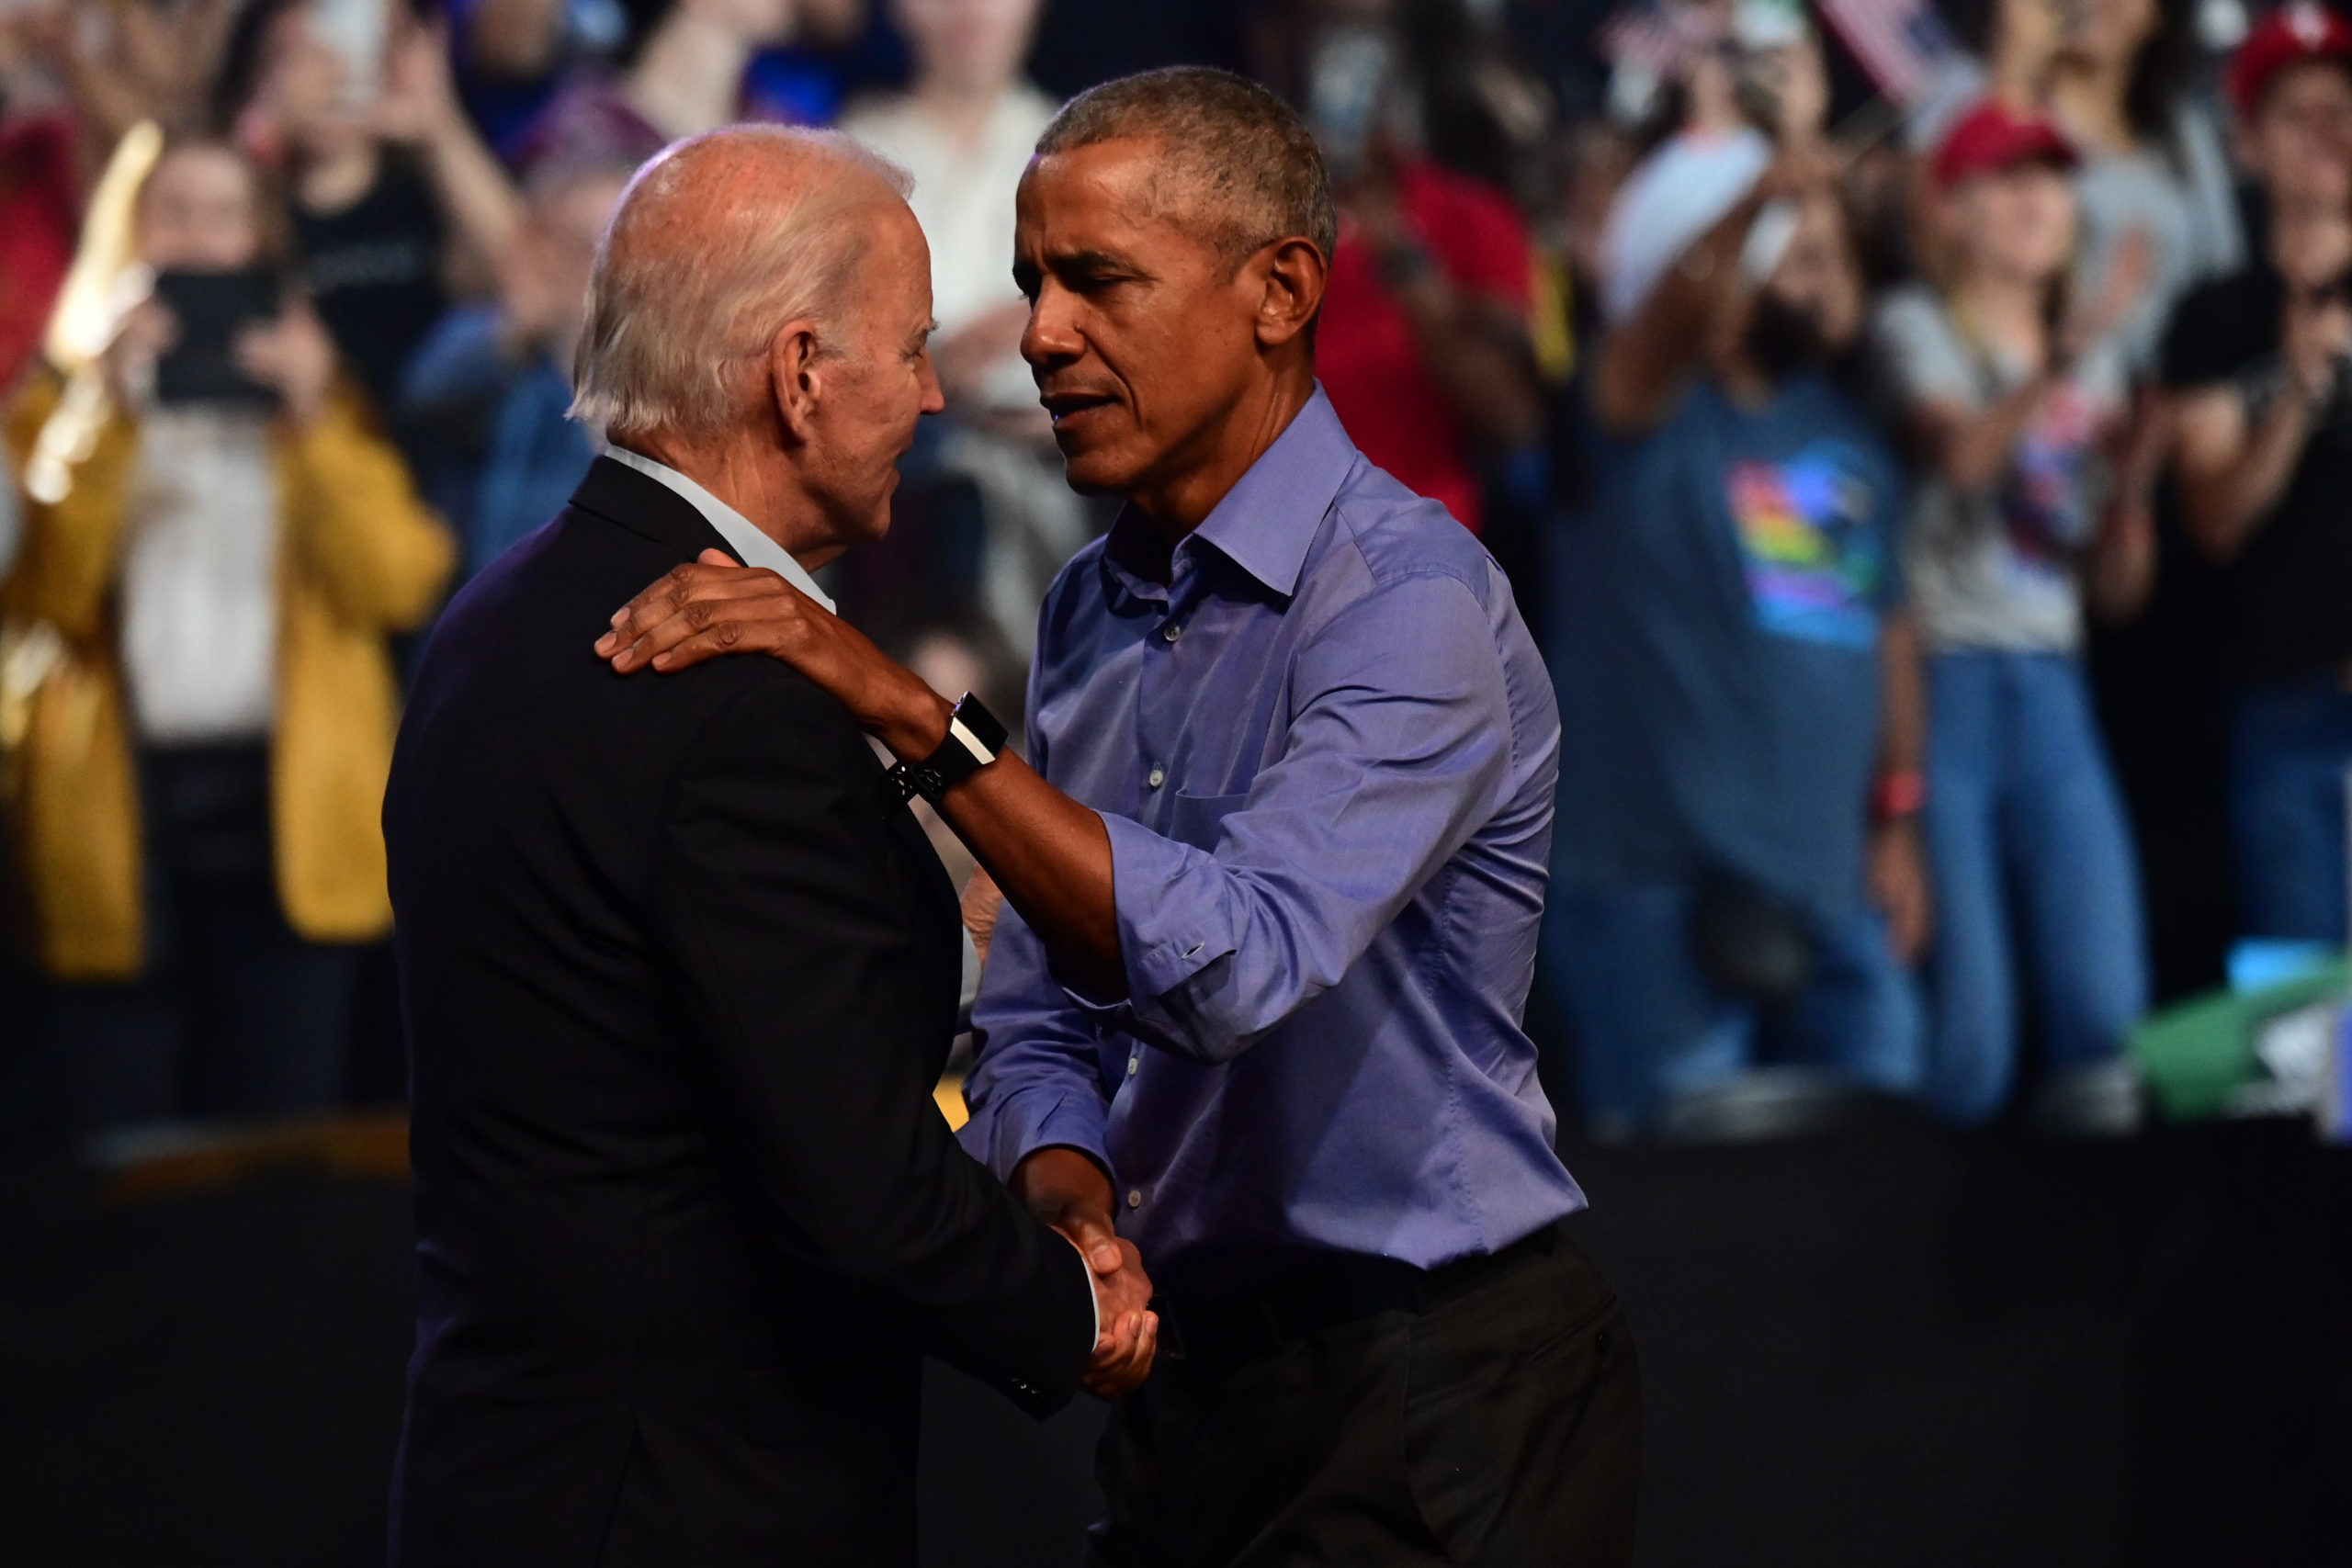 President Joe Biden (L) and former U.S. President Barack Obama (R) embrace on stage during a rally for Pennsylvania Democratic Senate nominee John Fetterman and Democratic gubernatorial nominee Josh Shapiro at the Liacouras Center on November 5, 2022 in Philadelphia, Pennsylvania. Fetterman will face Republican nominee Dr. Mehmet Oz as Shapiro faces Republican Doug Mastriano on November 8 in the midterm general election. (Photo by Mark Makela/Getty Images)